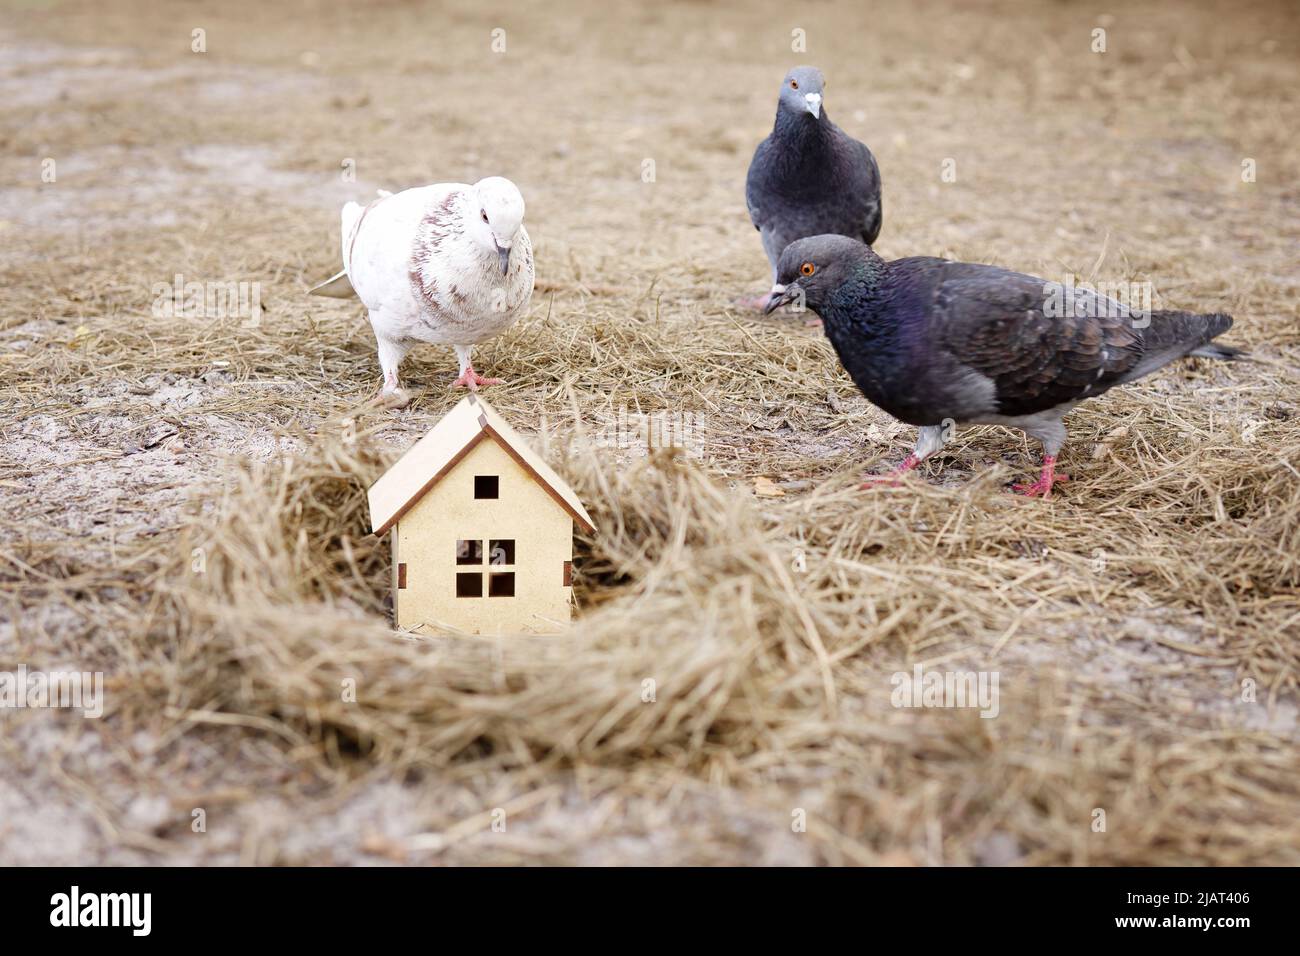 Pigeons inspecting a miniature wooden house standing inside the bird's nest. Choosing a perfect family home. Stock Photo